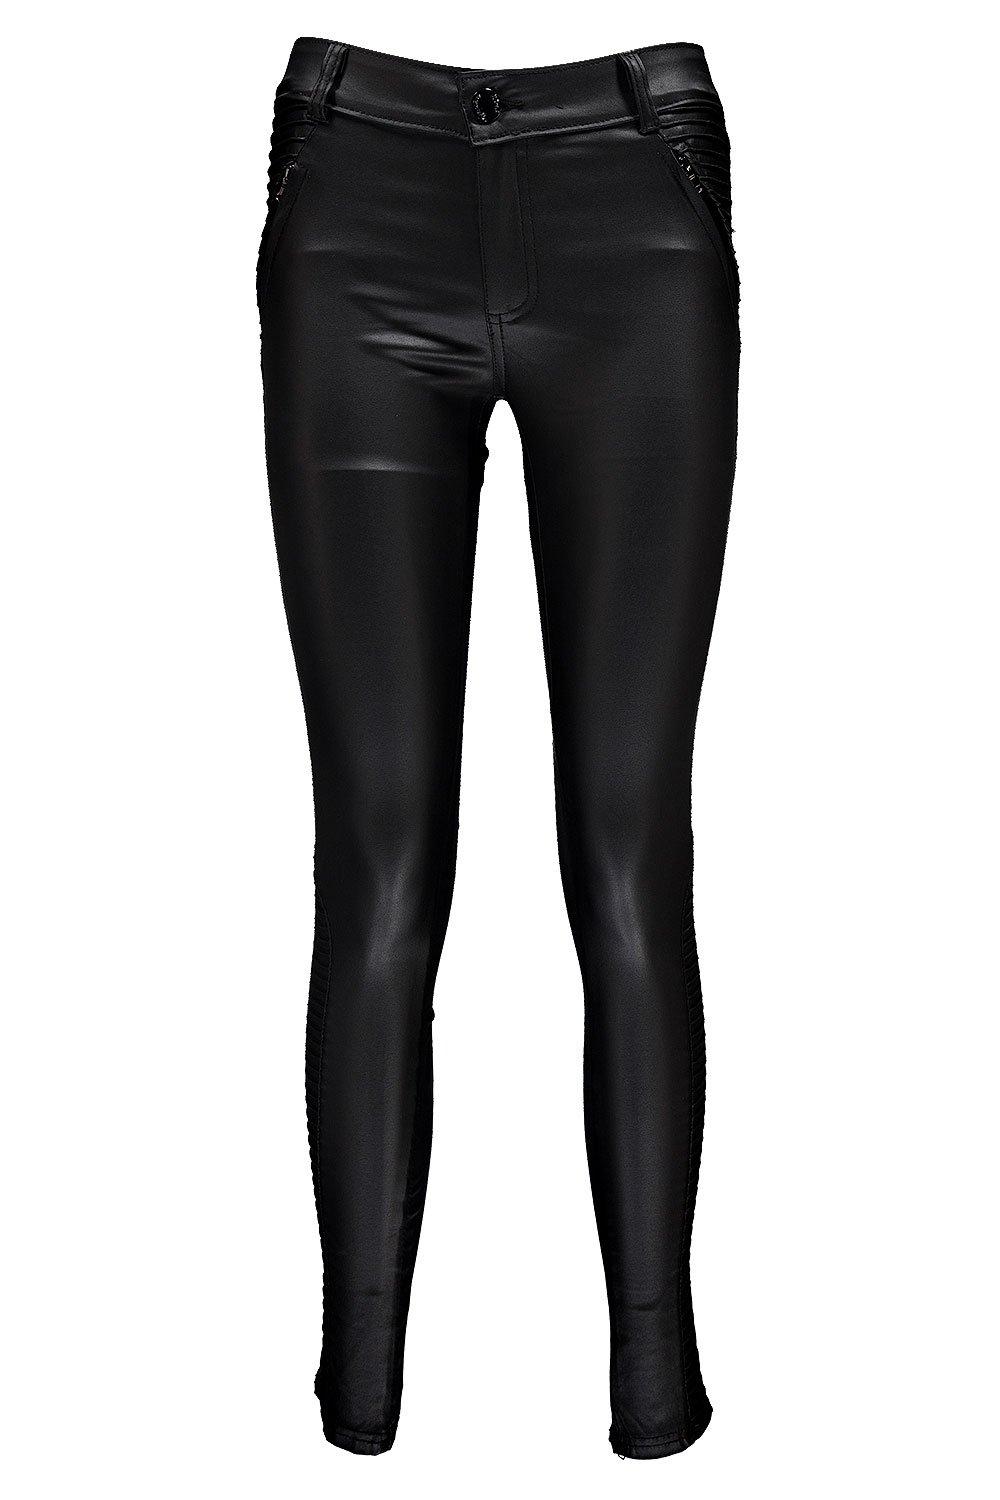 Alyson Panelled Coated PU Trousers